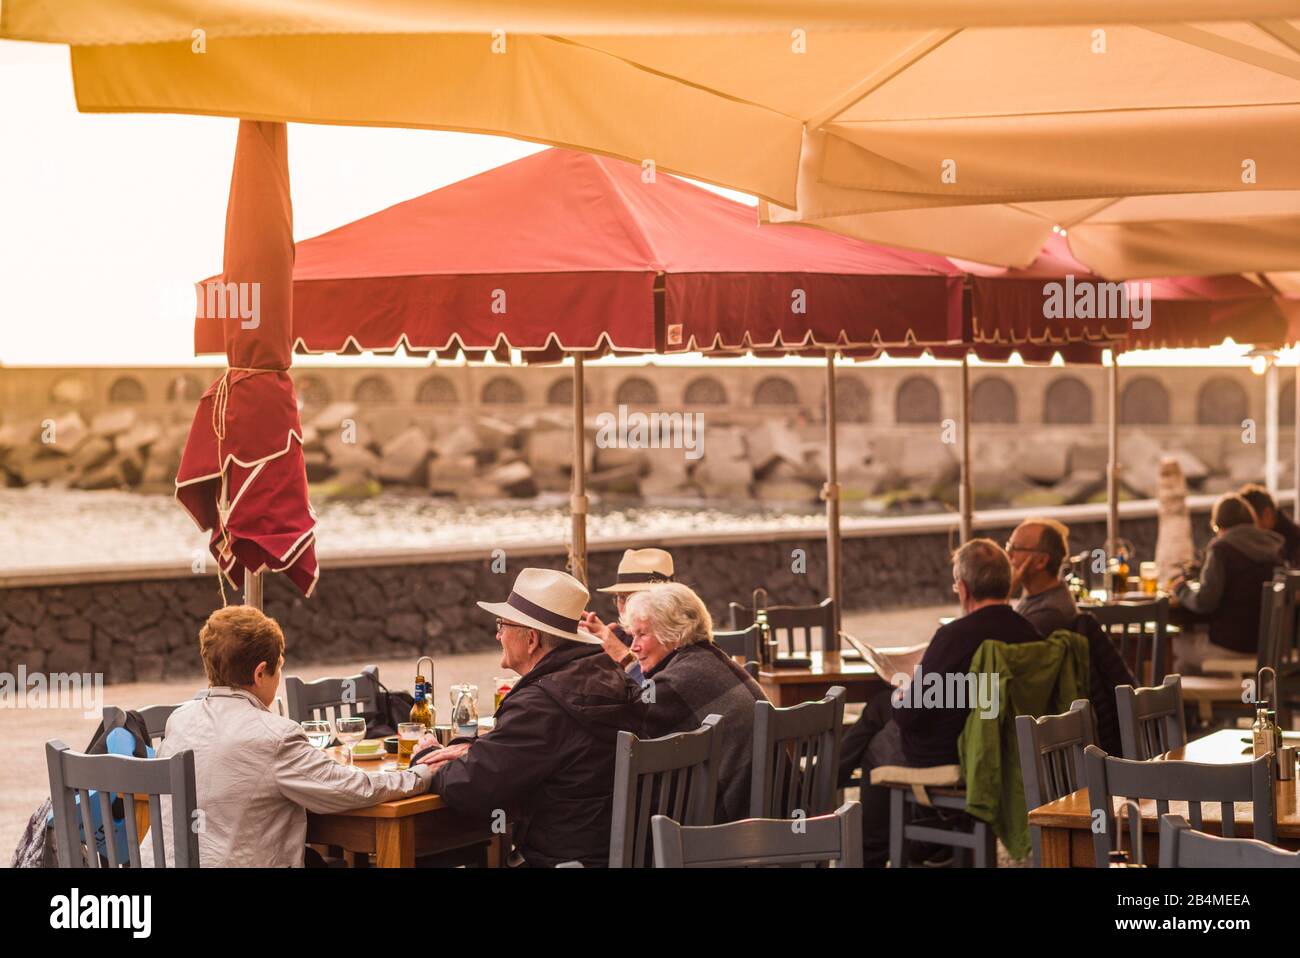 Spain, Canary Islands, La Palma Island, Tazacorte, resort town,  diners at outdoor cafe, NR Stock Photo